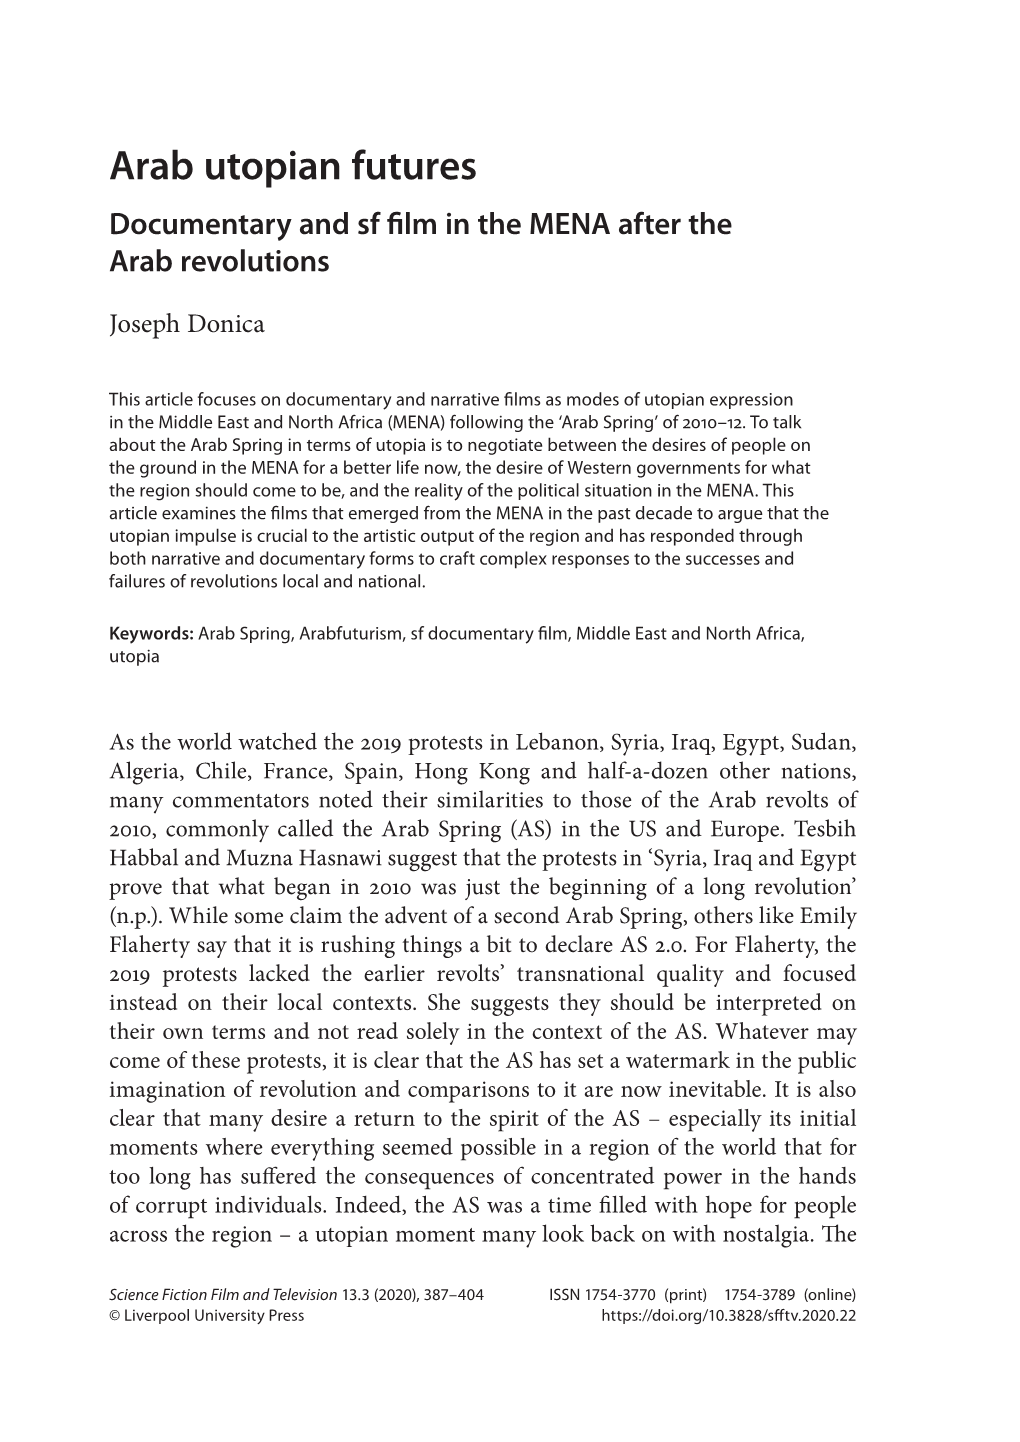 Arab Utopian Futures Documentary and Sf Film in the MENA After the Arab Revolutions